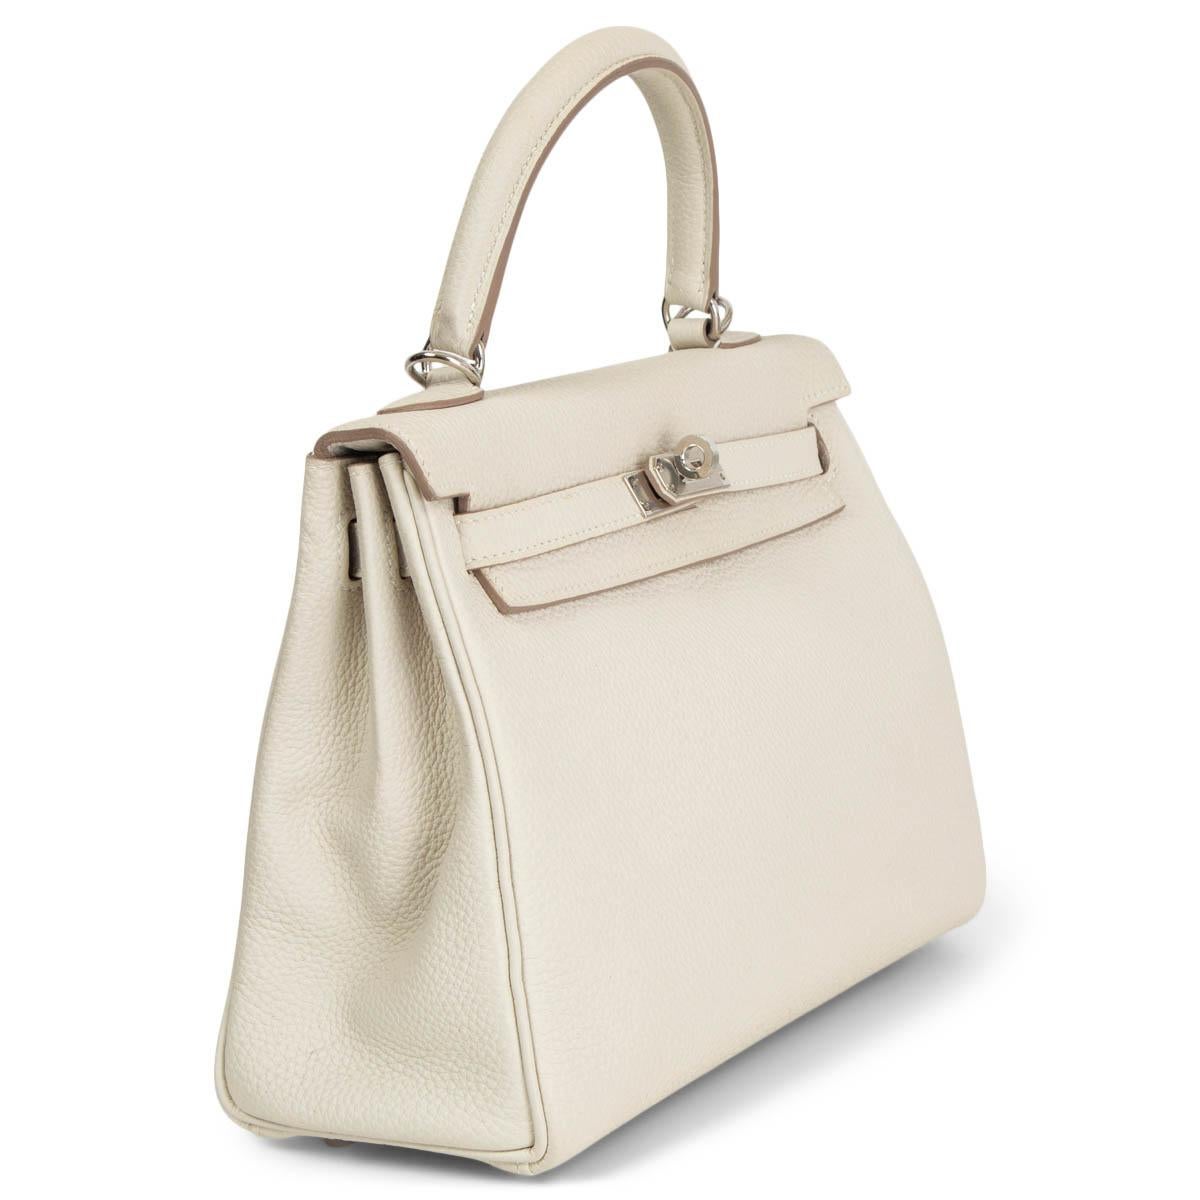 100% authentic Hermès Kelly 25 Retourne bag in Craie (ivory) Veau Togo leather featuring palladium hardware. Lined in Chevre (goat skin) with an open pocket against the front and a zipper pocket against the back. Has been carried with a tiny scratch